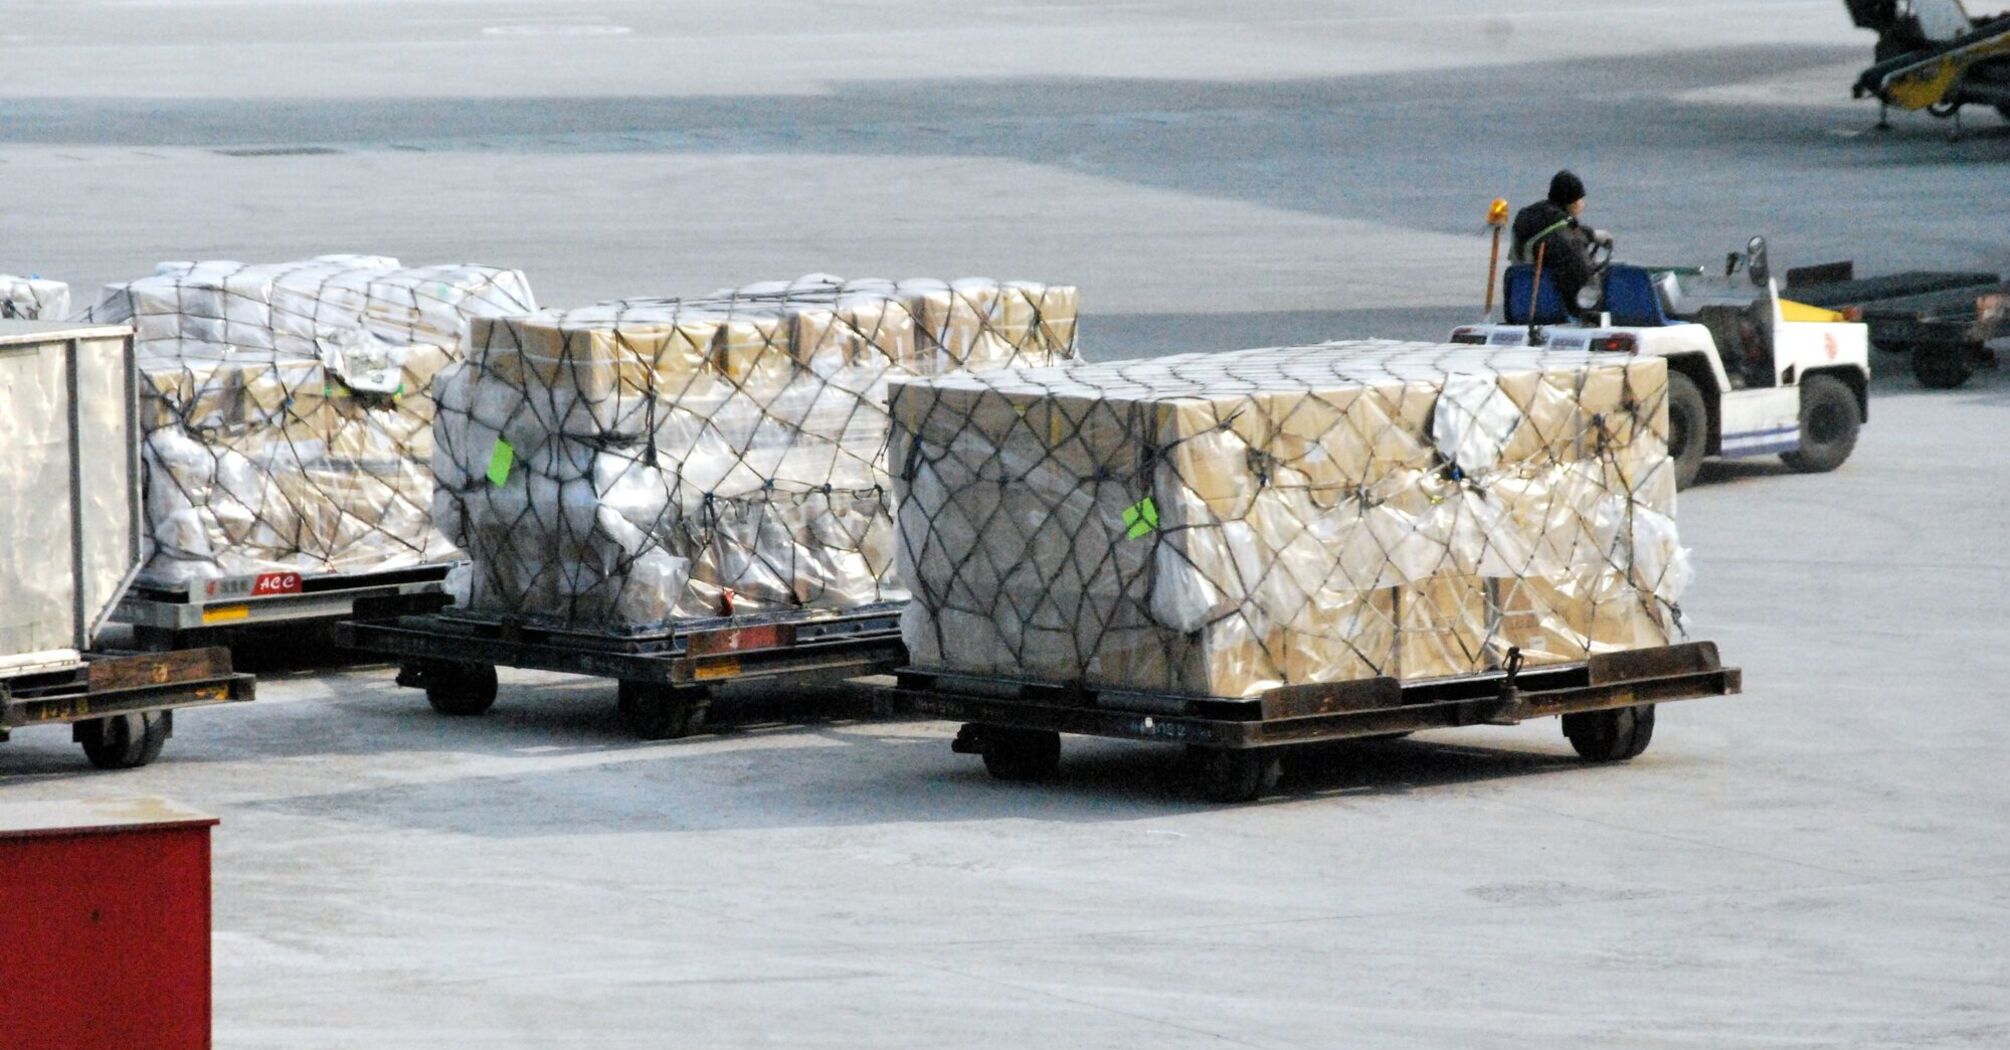 Air cargo pallets being transported on the tarmac by a cargo handler